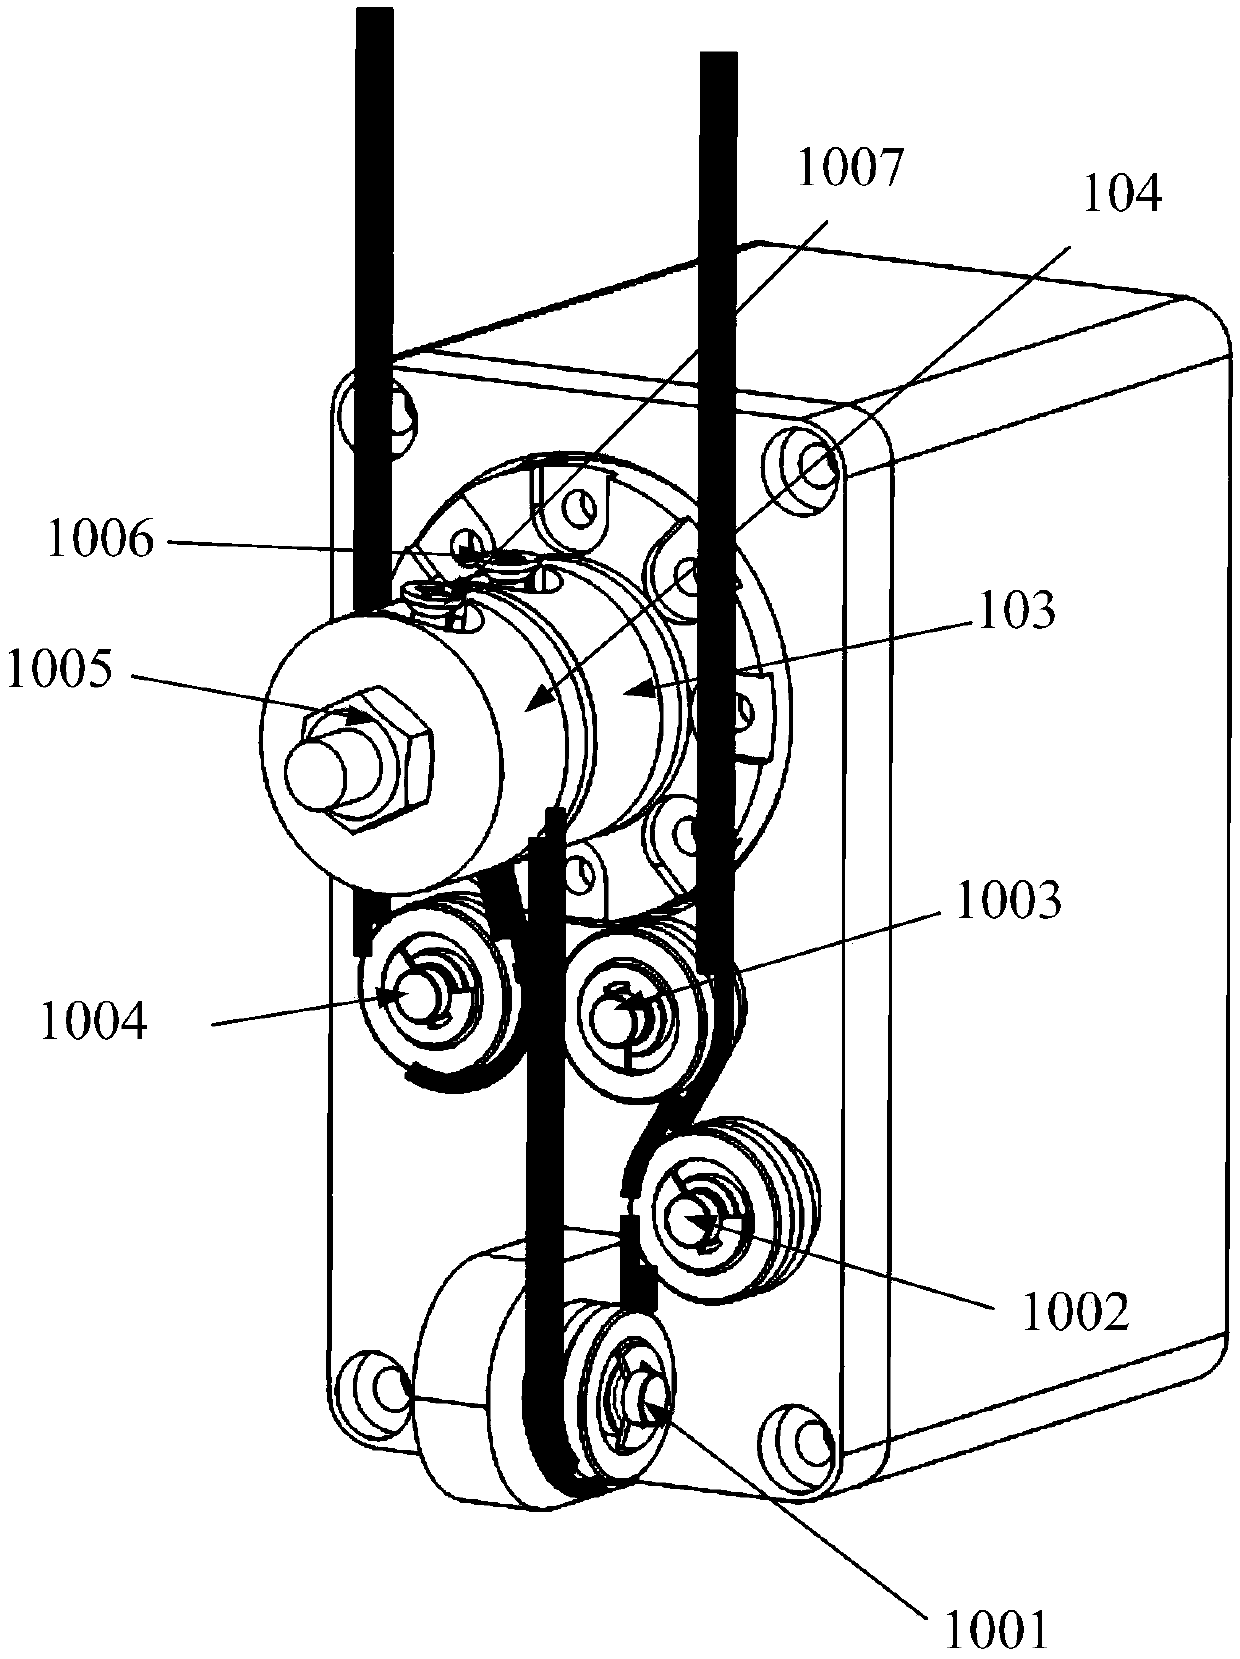 Modularized wire wrapping system of wire drive mechanism